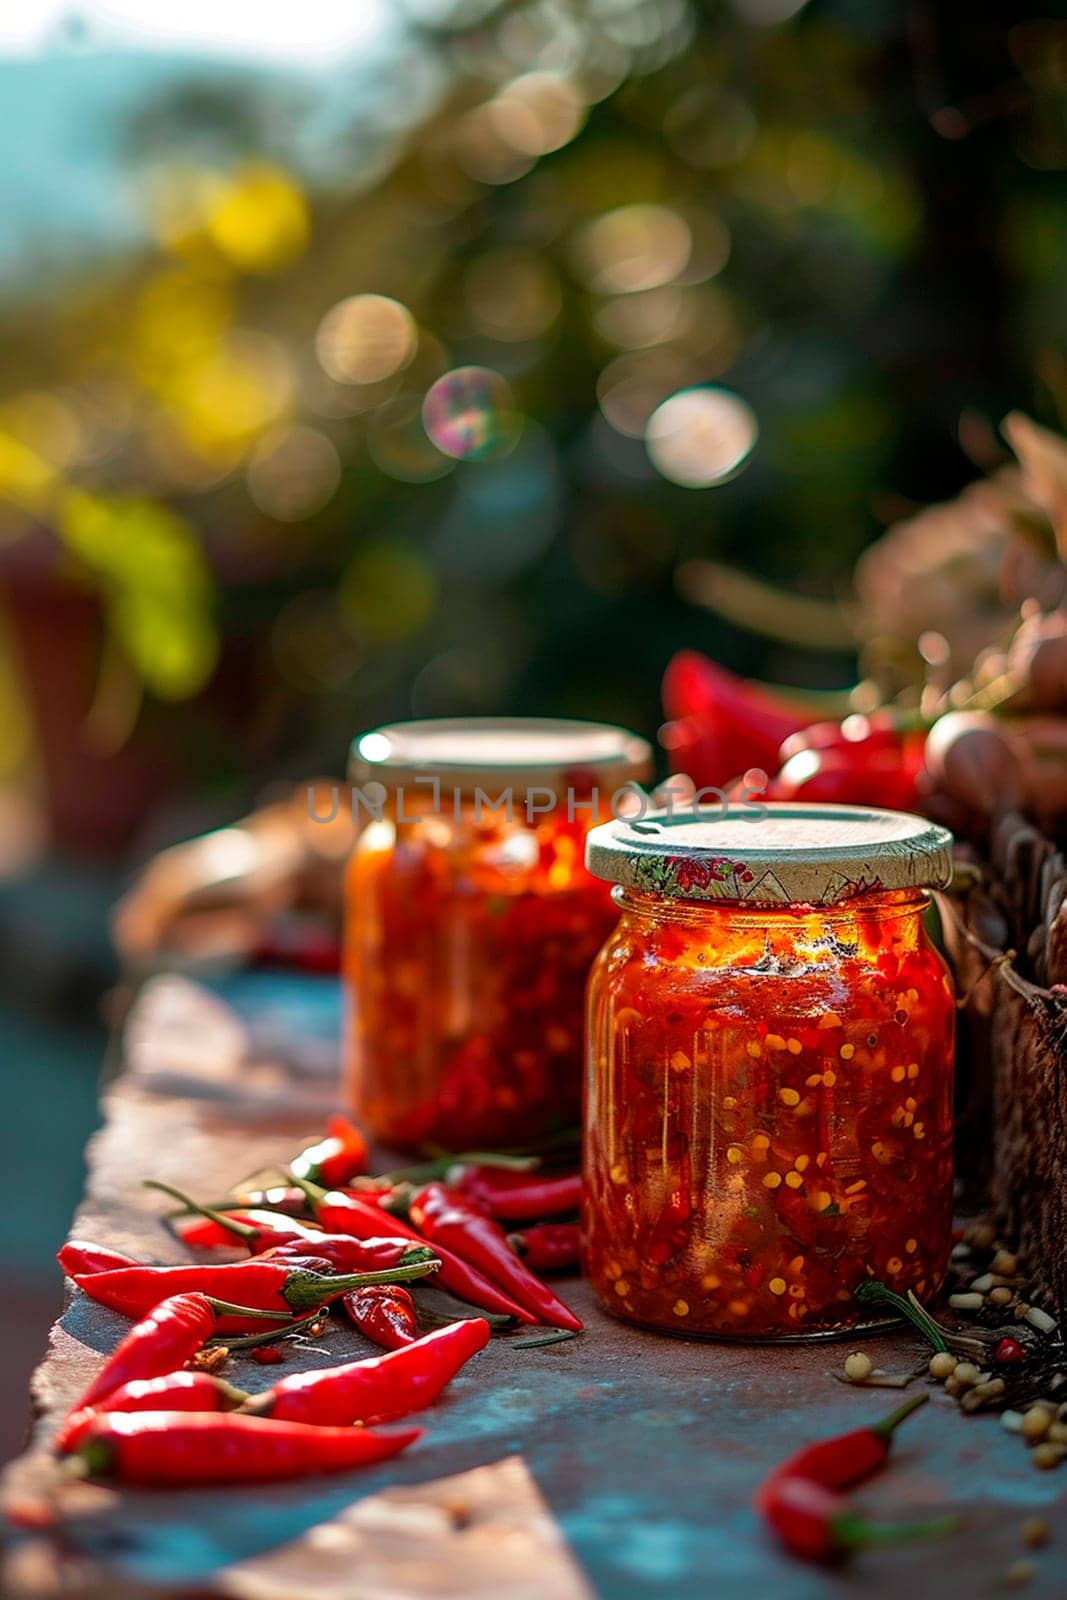 Pepper chilli preserved in jars. Selective focus. Food.